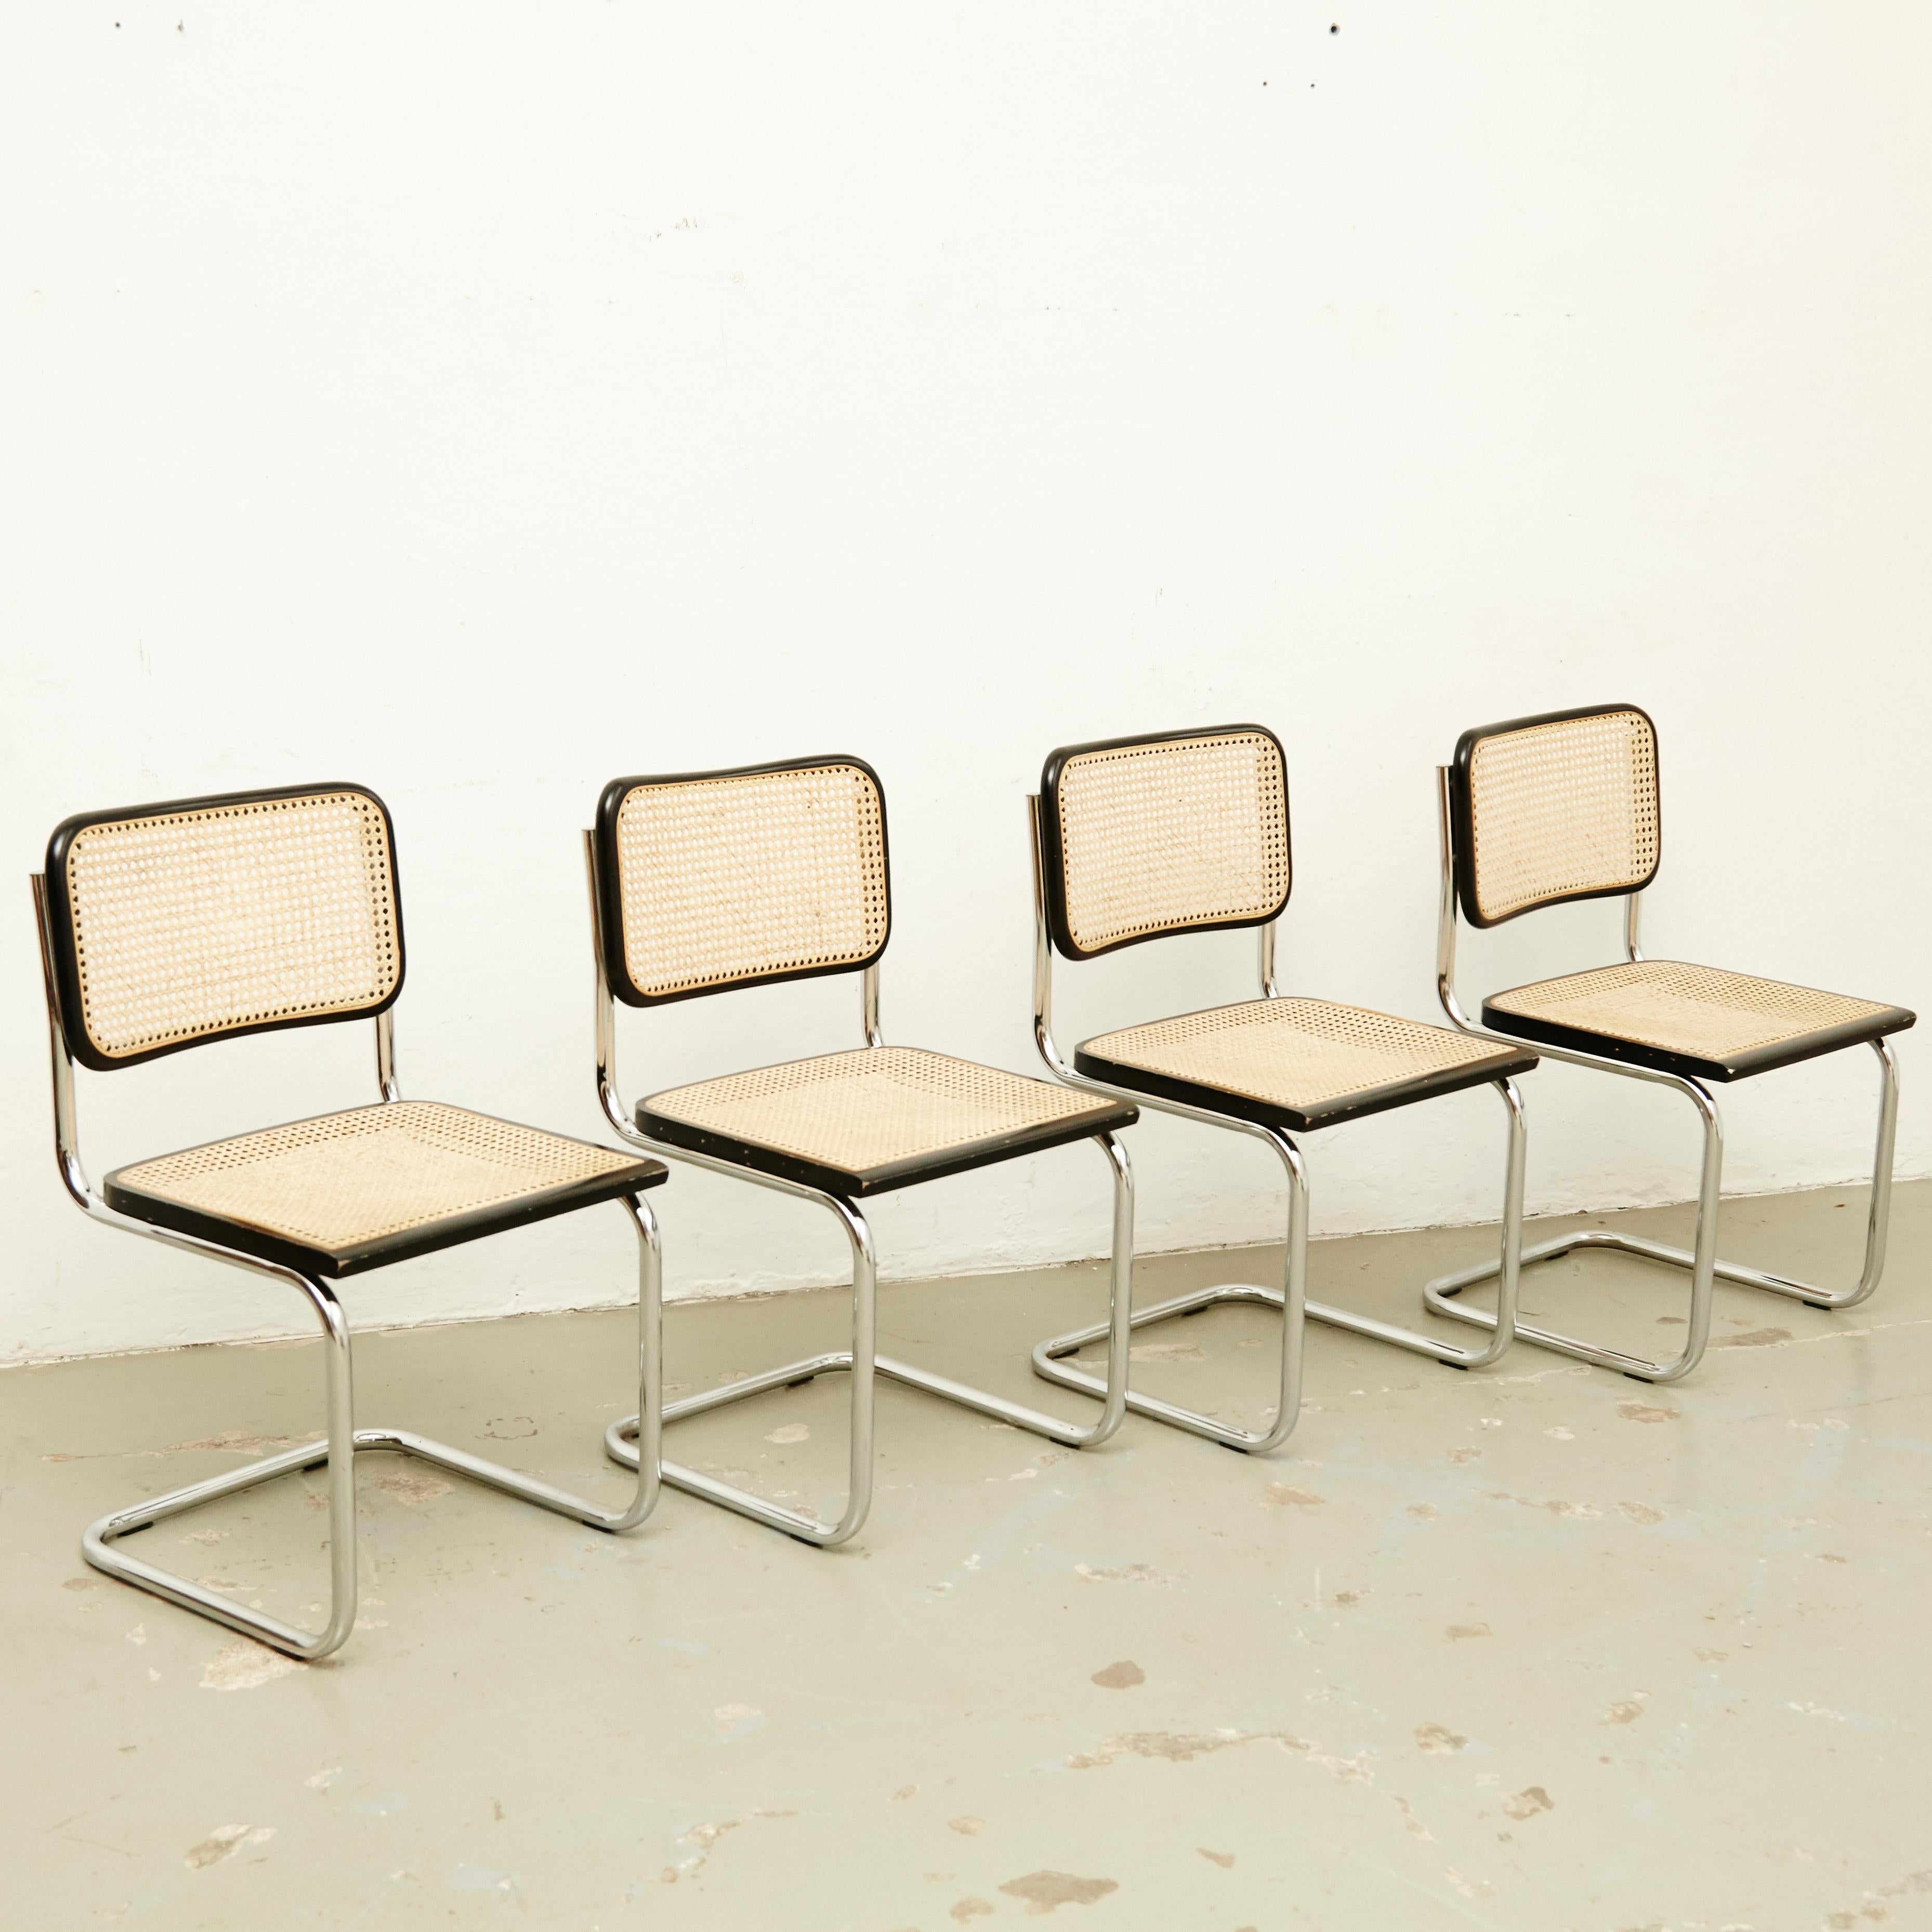 Set of four chairs, model Cesca, designed by Marcel Breuer.
Manufactured in Italy circa 1970 by unknown manufacturer.

Metal pipe frame, wood seat and back structure and rattan.

In good original condition, with minor wear consistent with age